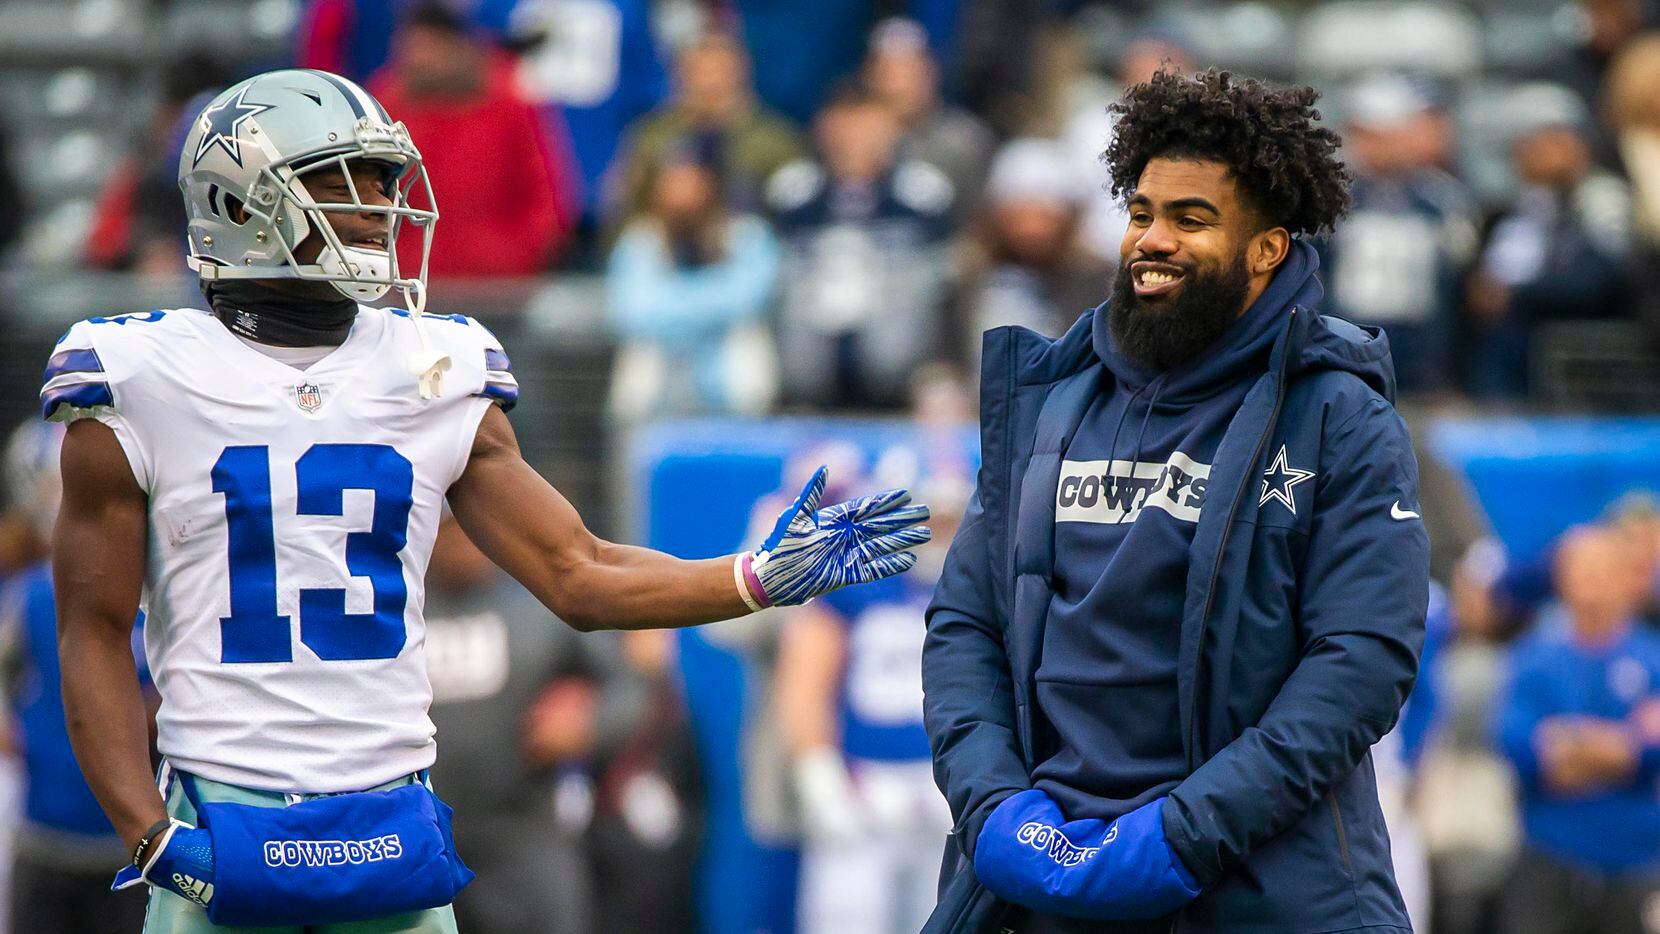 Dallas Cowboys running back Ezekiel Elliott, who was not in uniform for the game, laughs with wide receiver Michael Gallup (13) as the team warms before an NFL football game against the New York Giants at MetLife Stadium on Sunday, Dec. 30, 2018, in East Rutherford, New Jersey. (Smiley N. Pool/The Dallas Morning News)